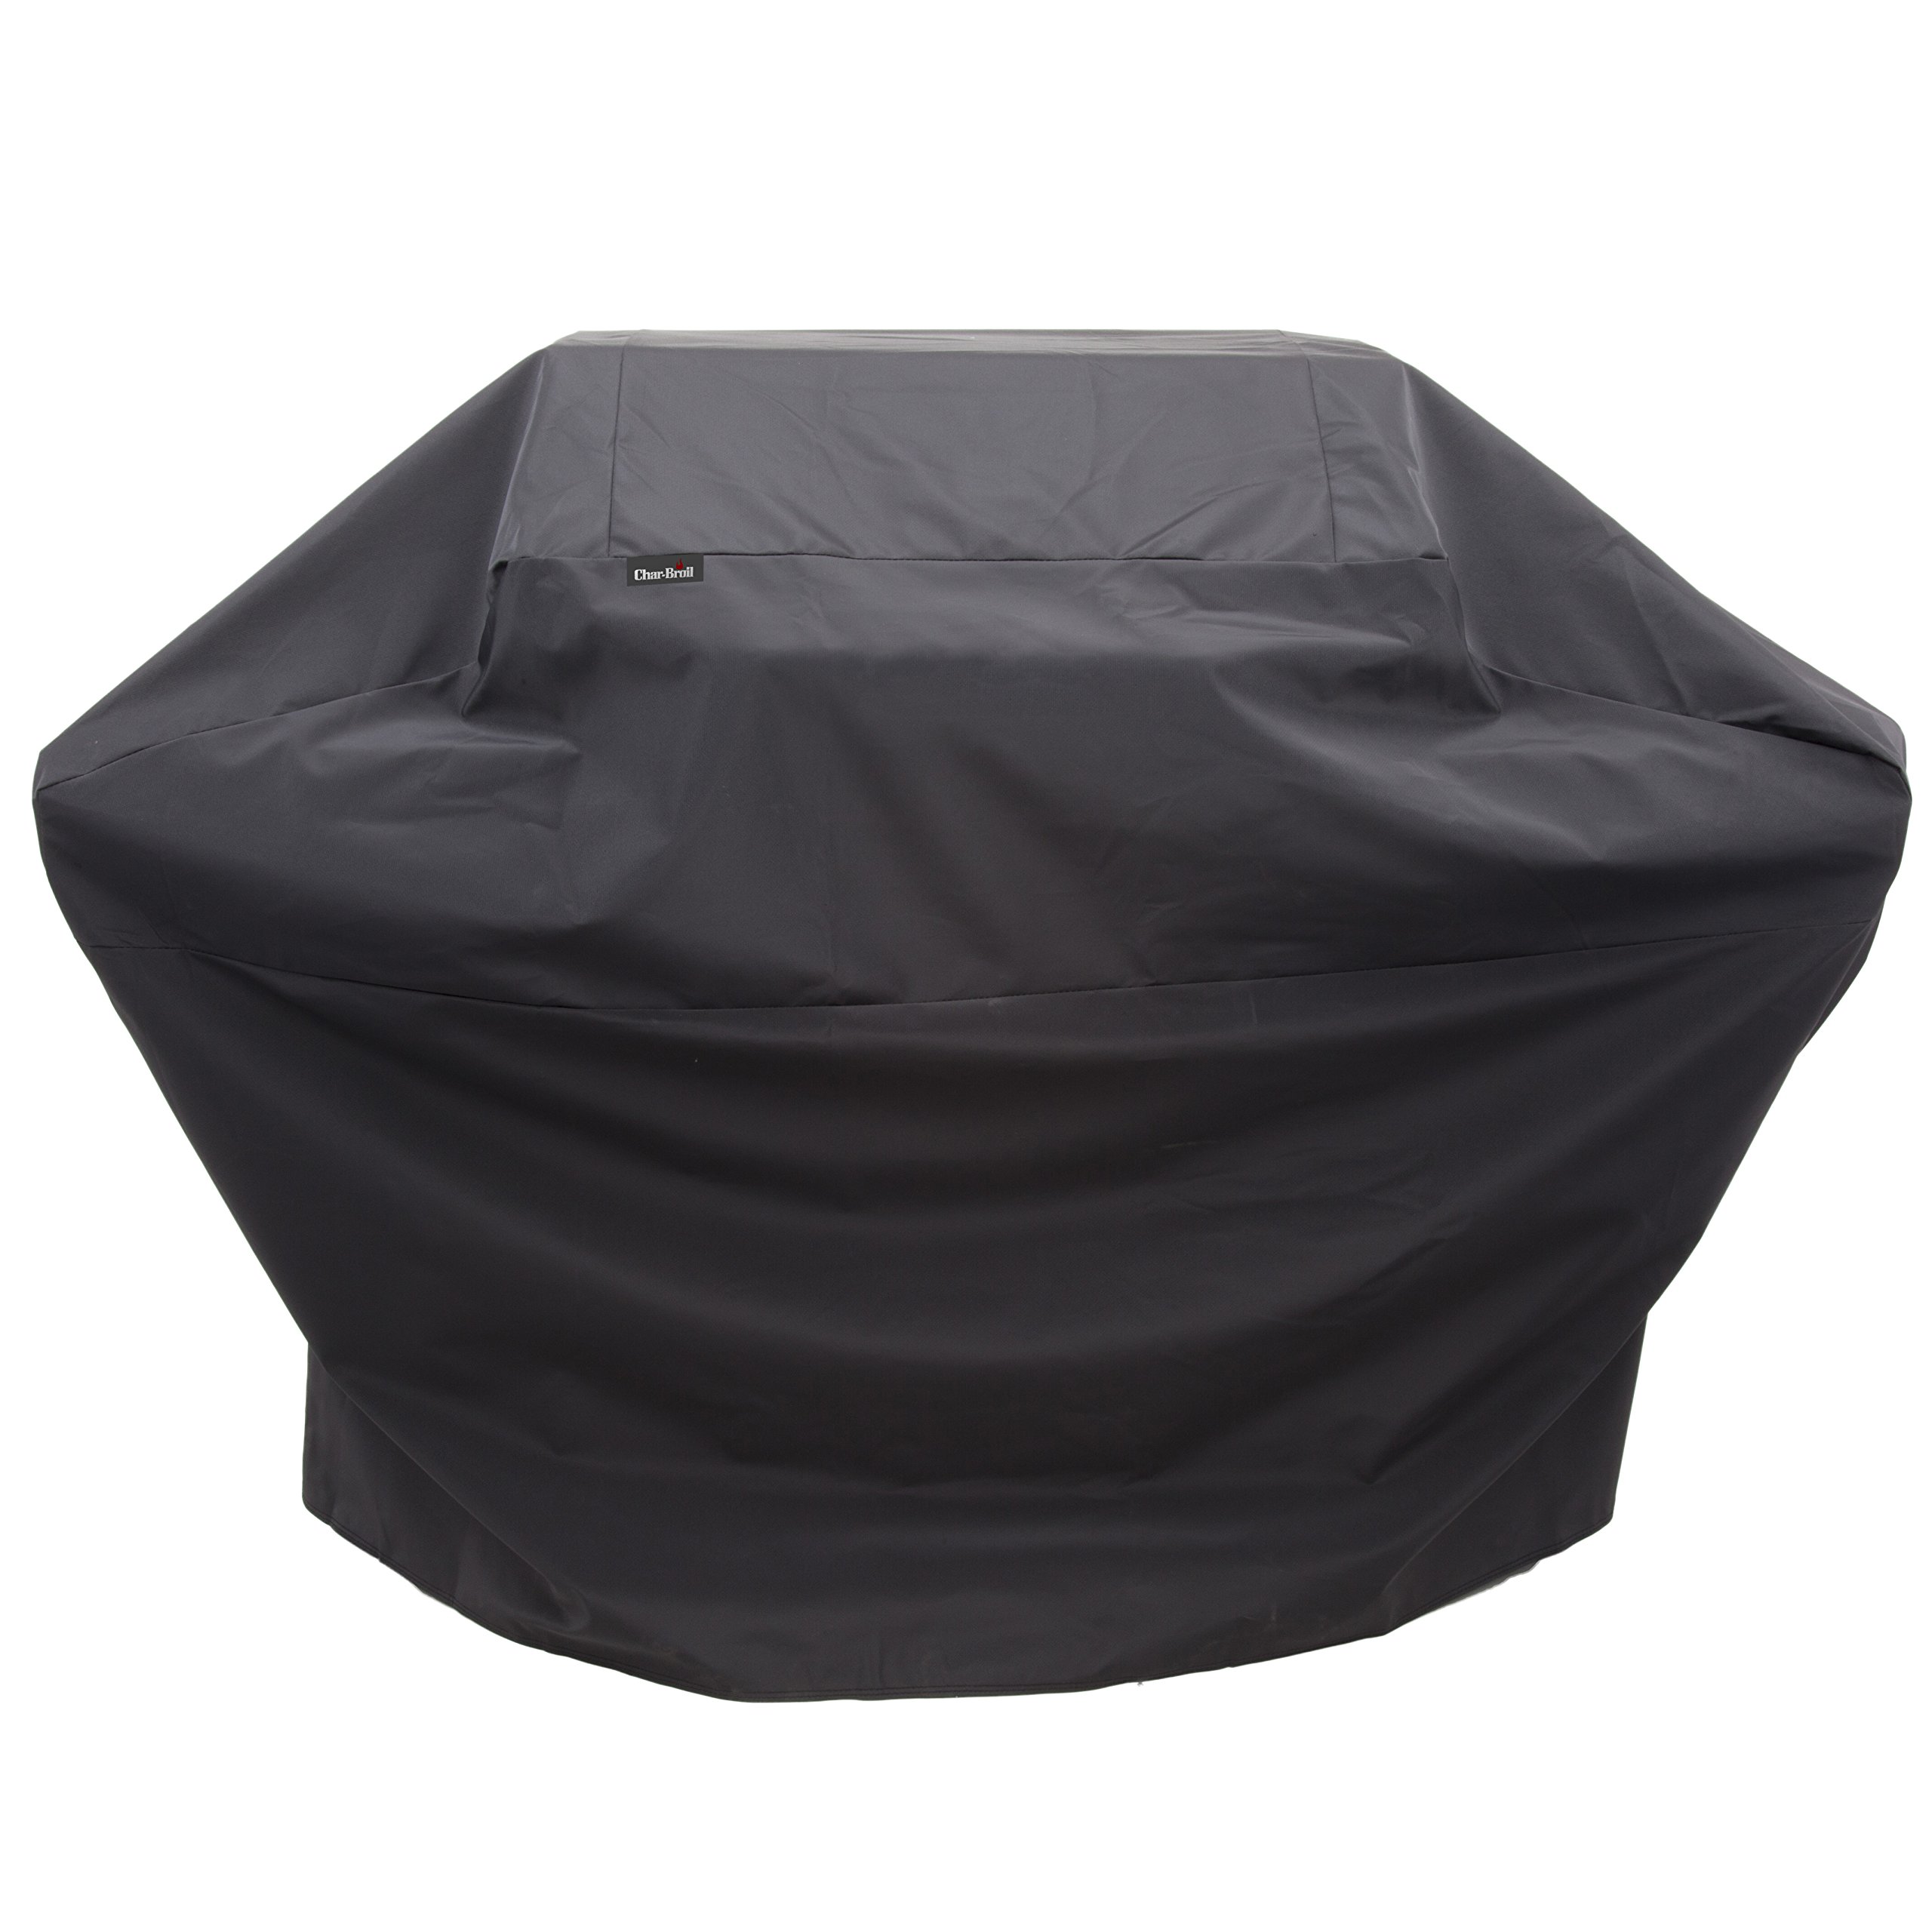 Char Broil Performance Extra Large Grill Cover for $15.99 at Amazon